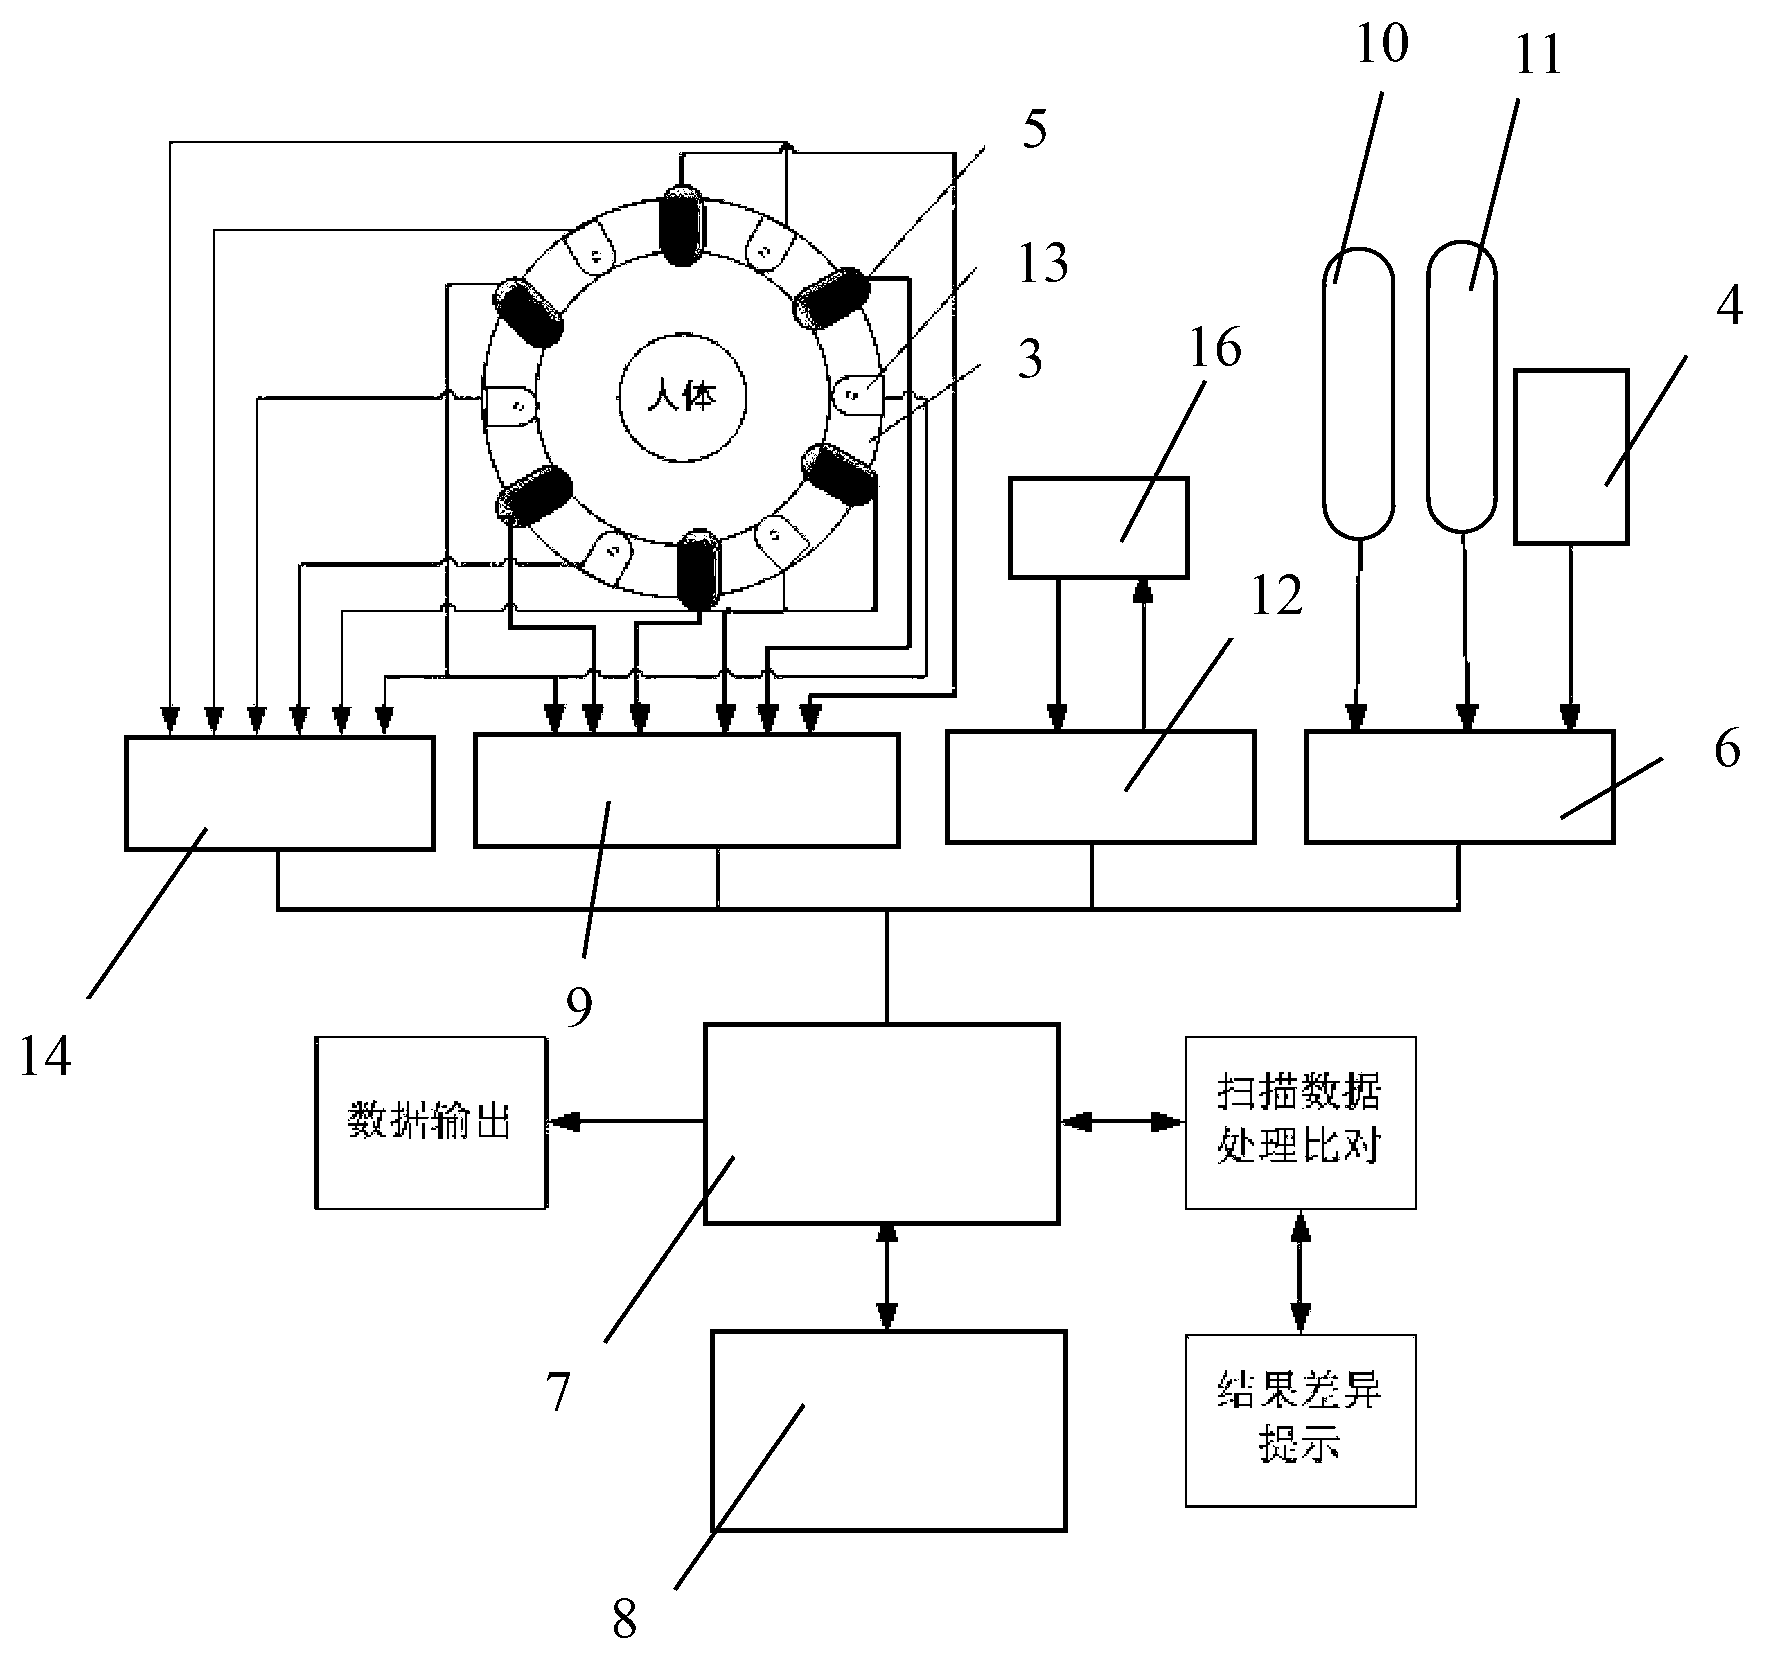 Infrared three-dimensional thermal imaging scanning system